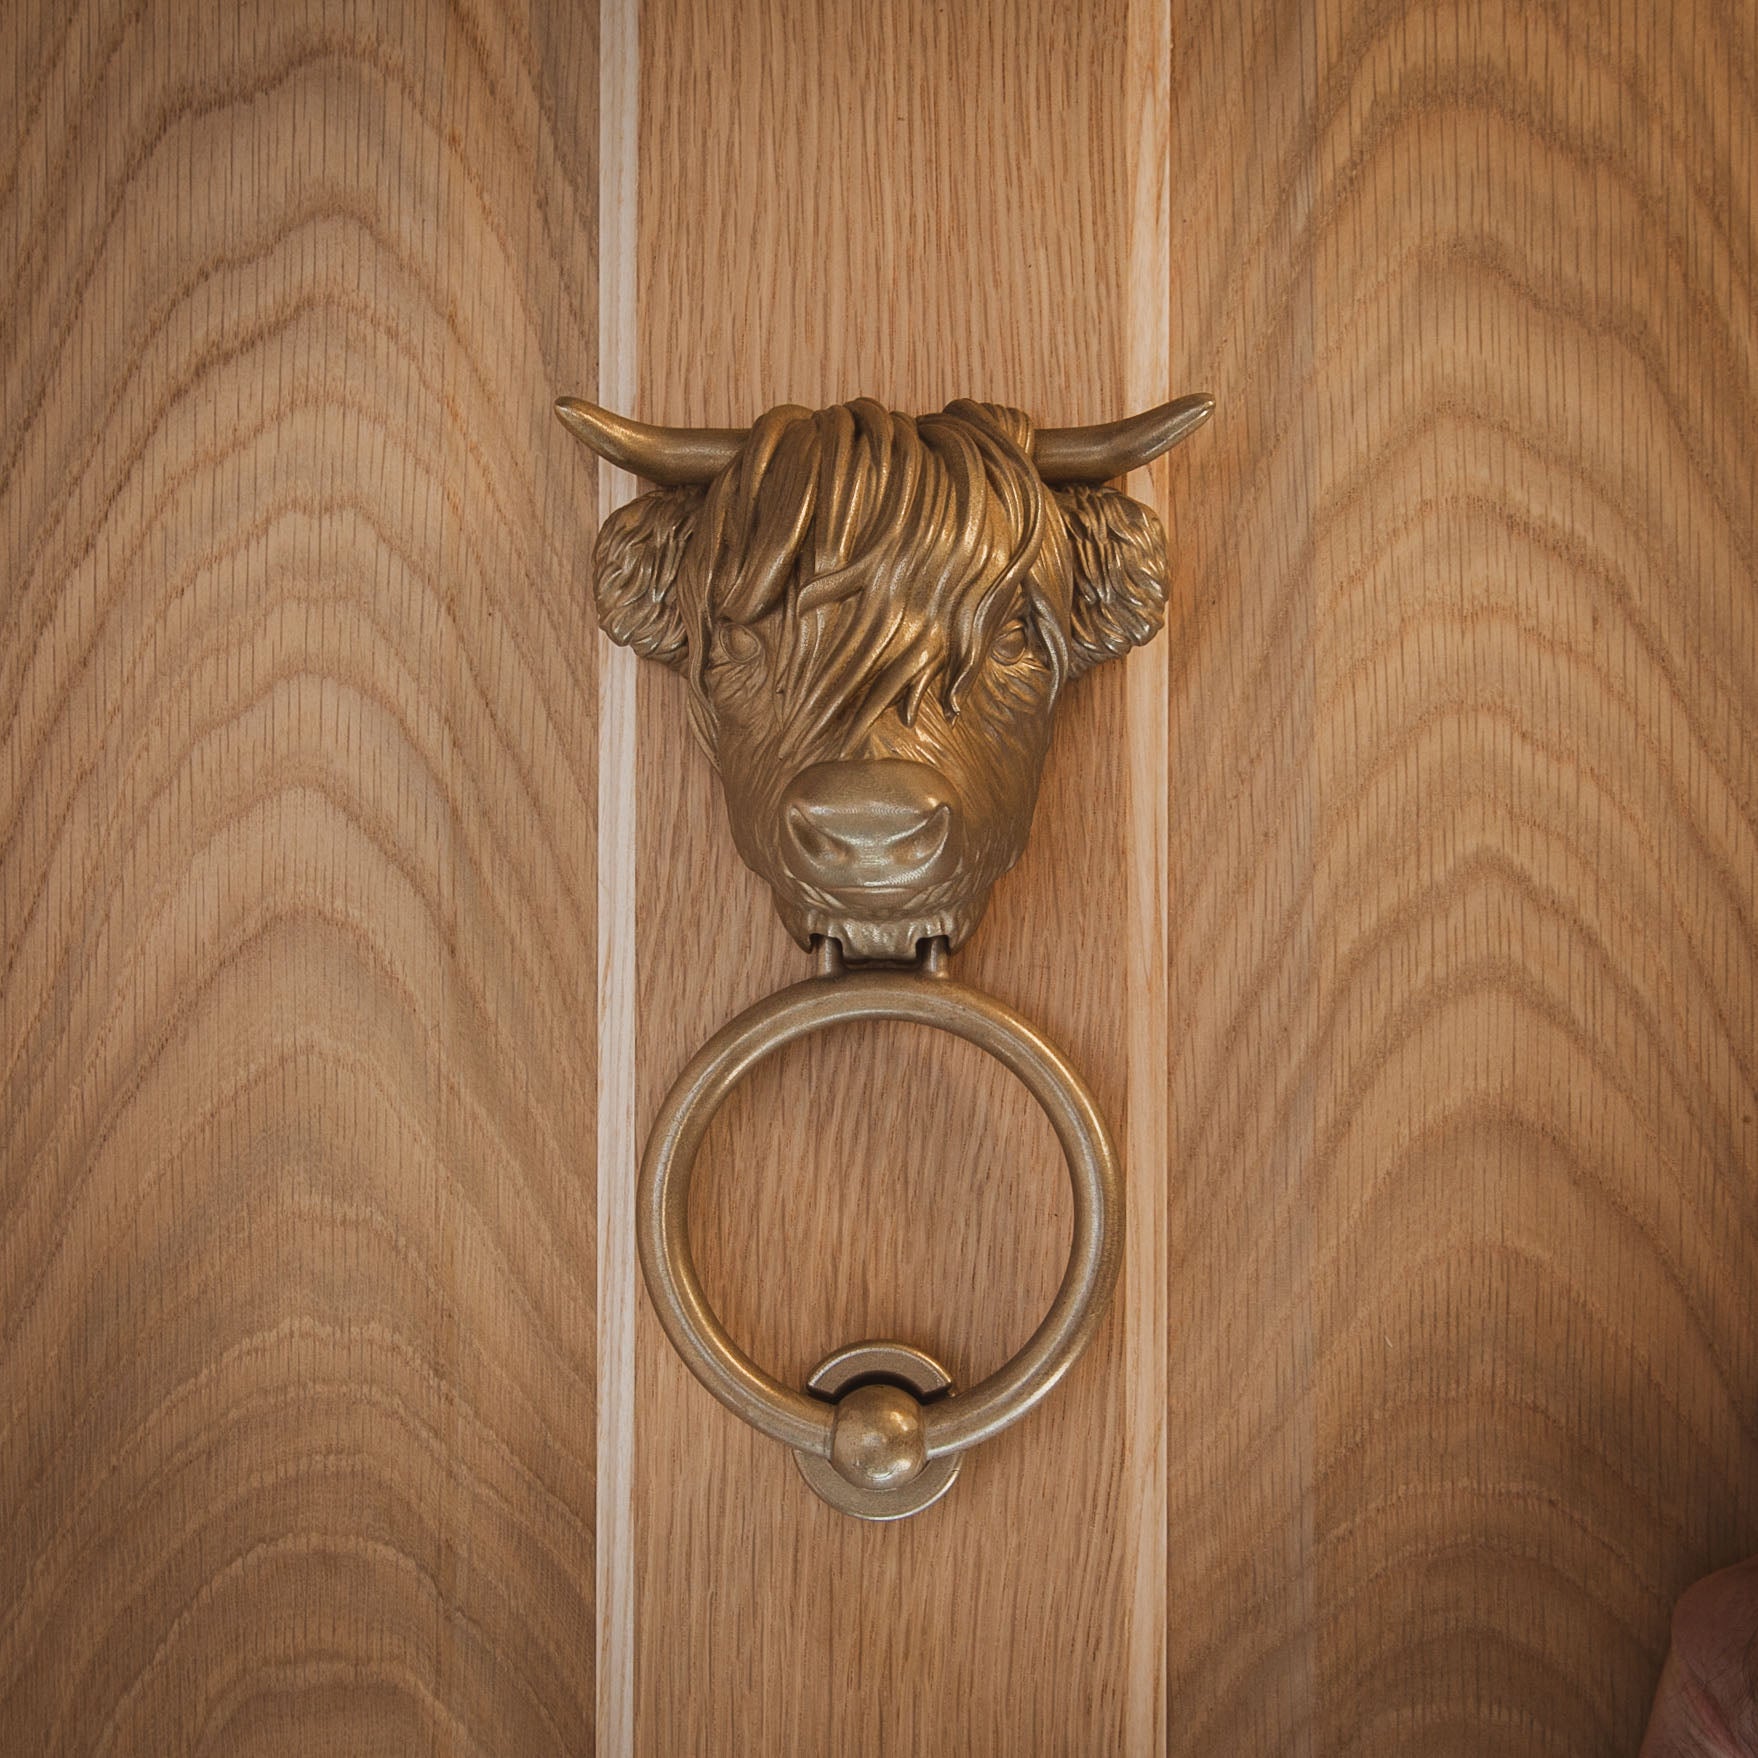 Highland Cow Door Knocker (2 styles) – The Yorkshire Foundry